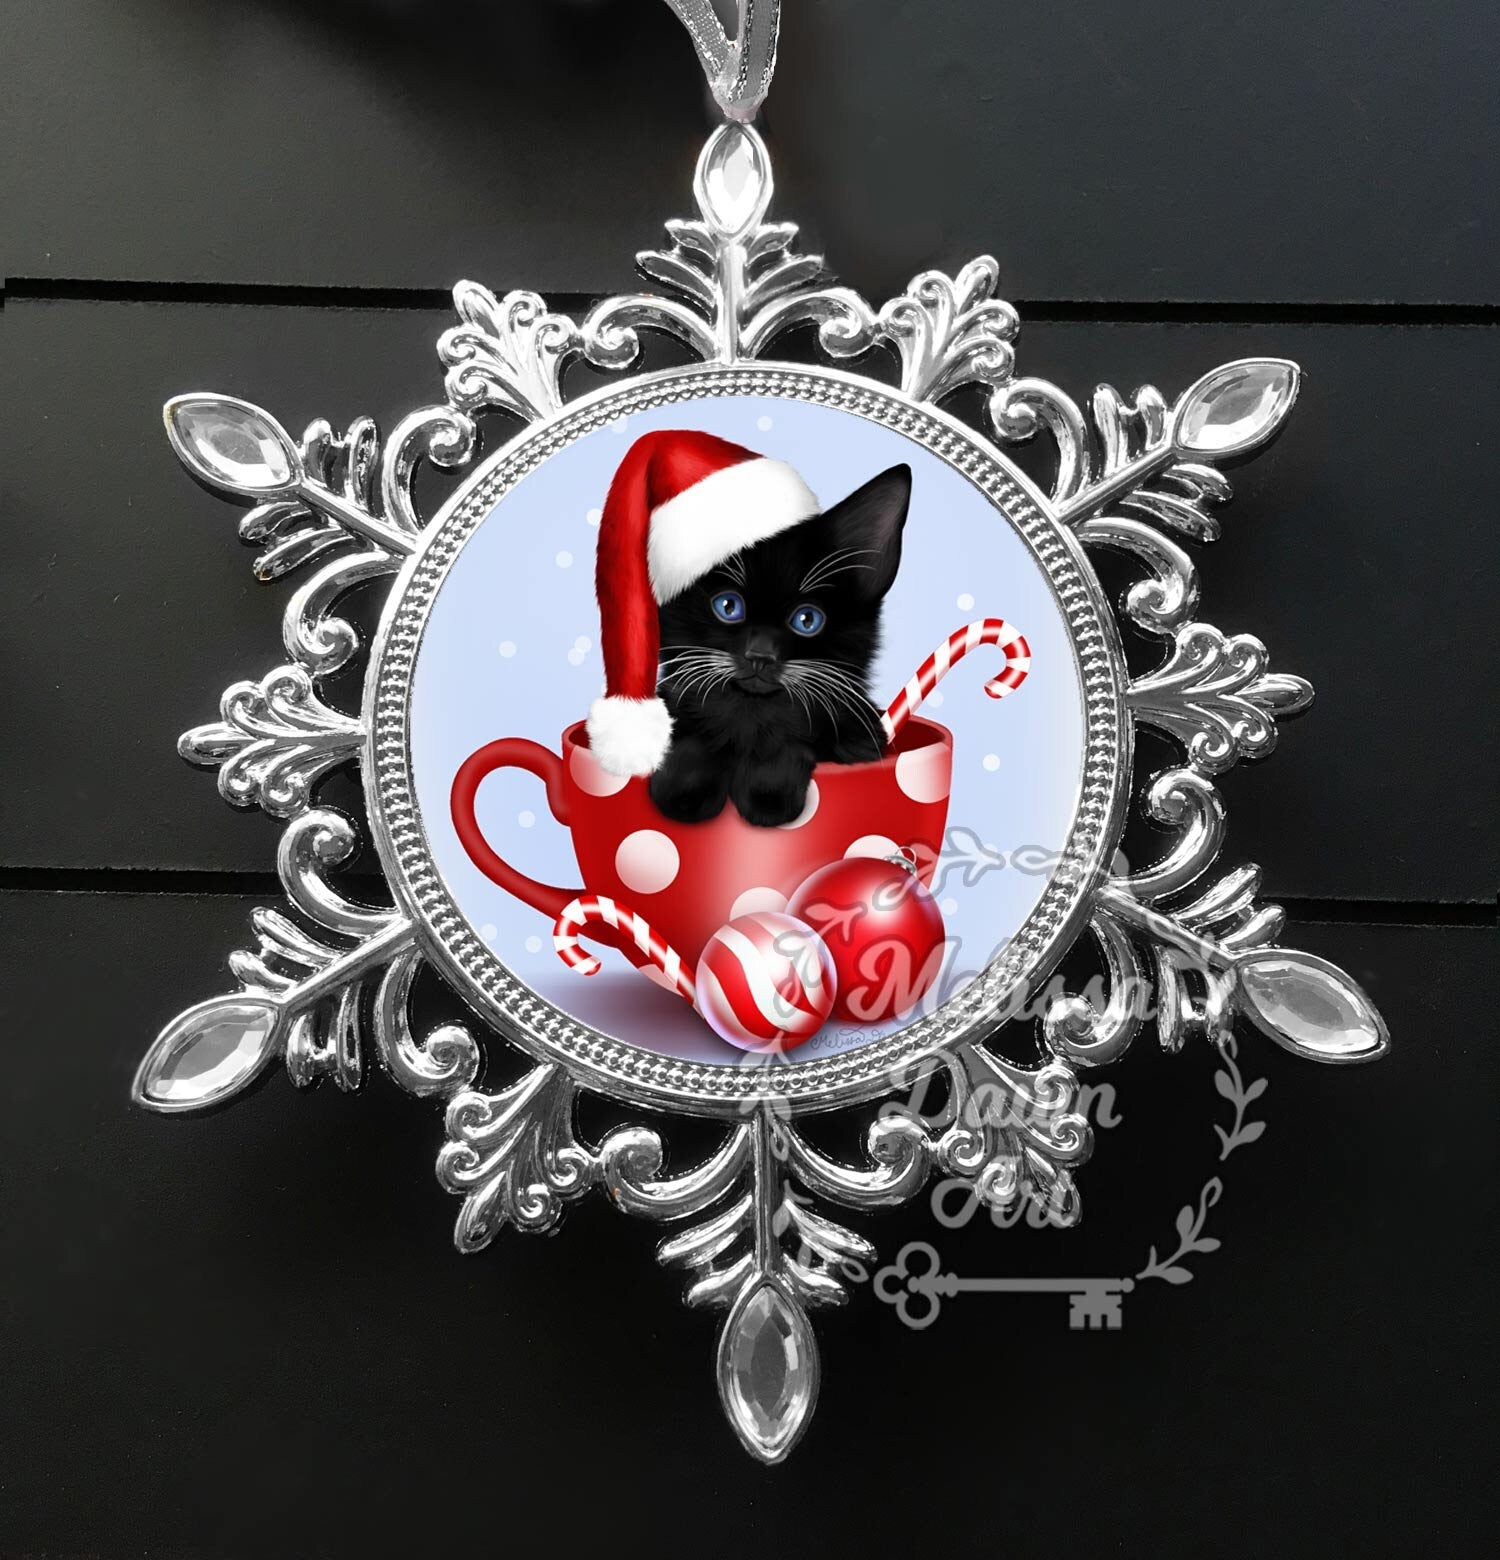 Personalized Cat Ornament / Black Cat Ornament / Custom Cat Ornament / Black Cat Art / Cat Christmas Ornament / Ornament / Candy Cane Cheer